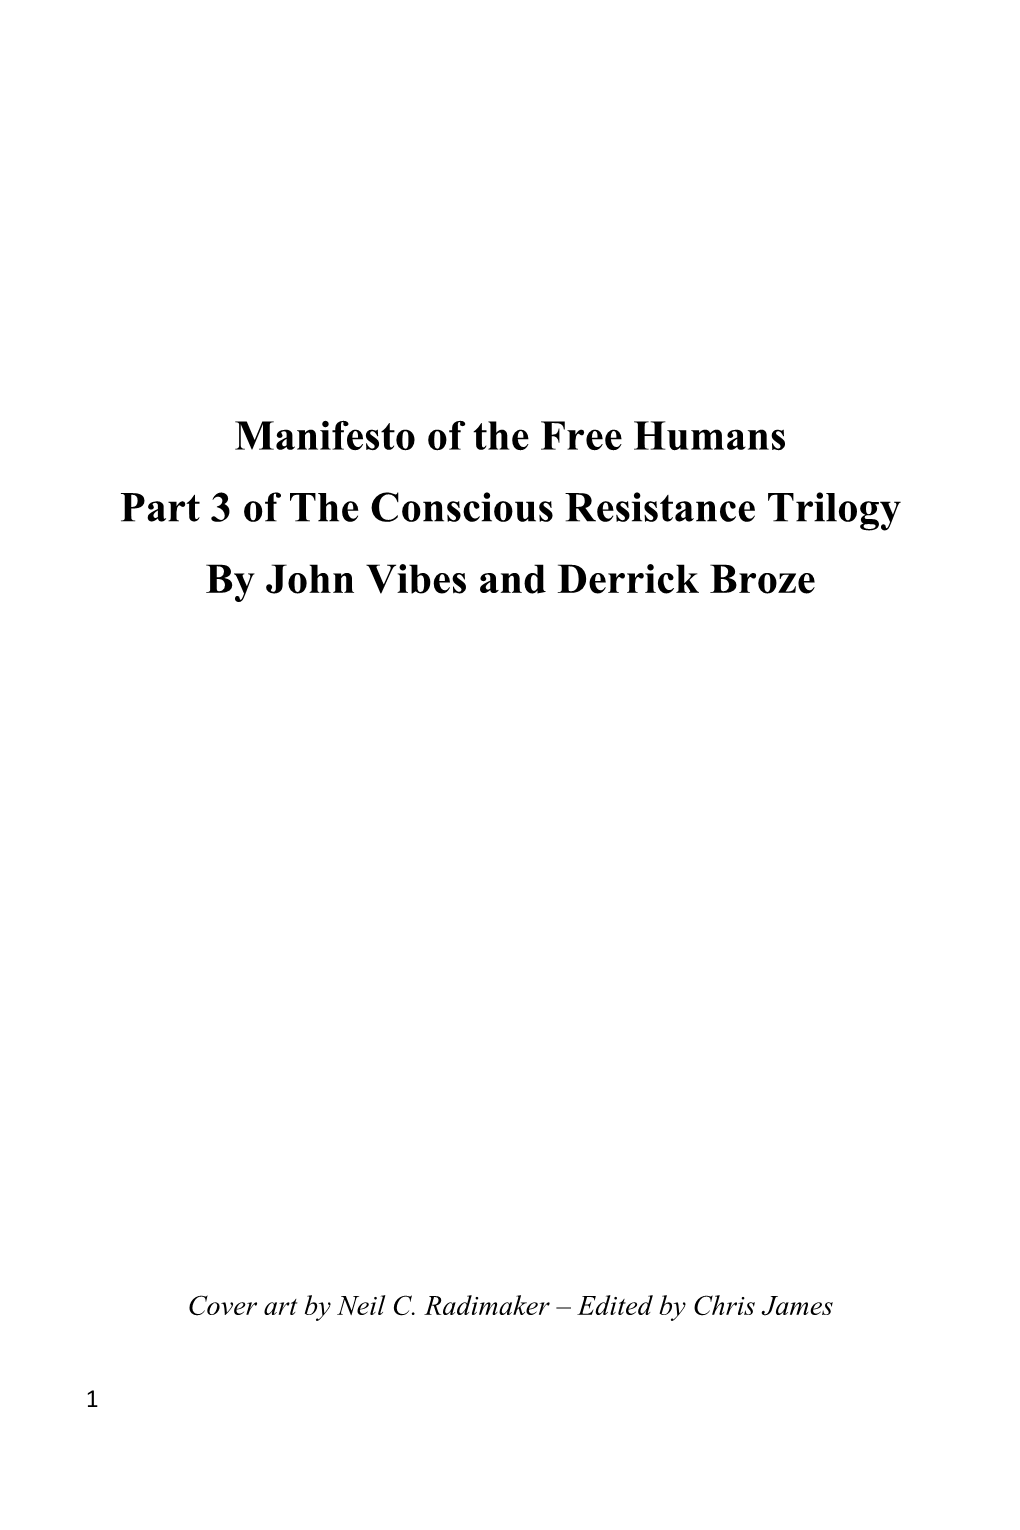 Manifesto of the Free Humans Part 3 of the Conscious Resistance Trilogy by John Vibes and Derrick Broze